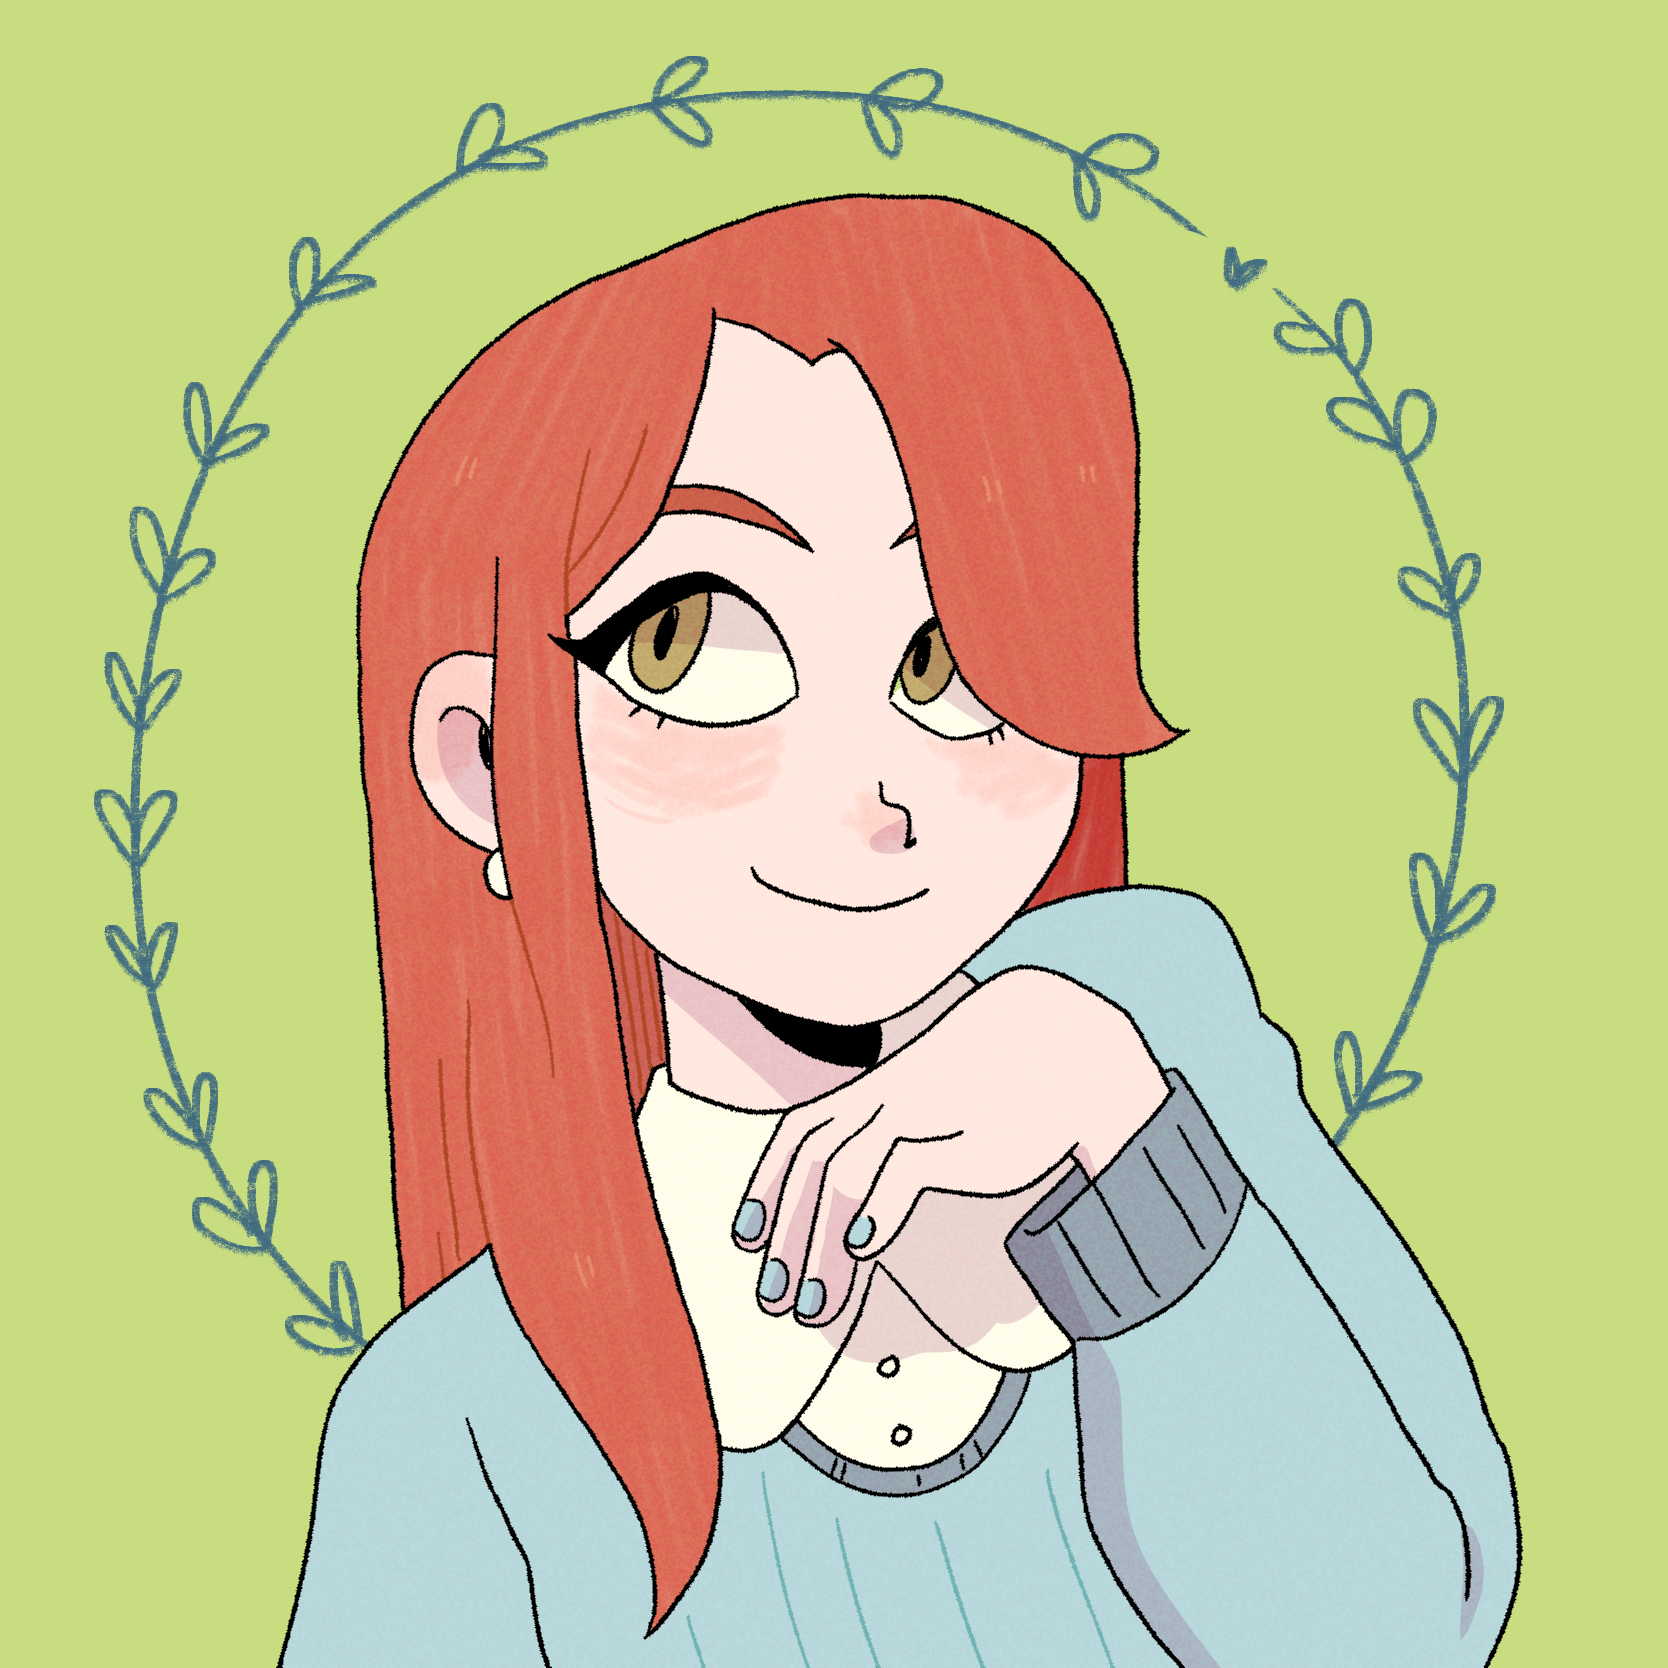 A drawing of a white girl with long red hair and green eyes smiling and looking off to the side with the back of her hand almost raised to her chin coyly. She is wearing a white collared shirt under a light blue sweater with matching painted nails. The background is light green and a simple vine with leaves creates a circle behind her head.